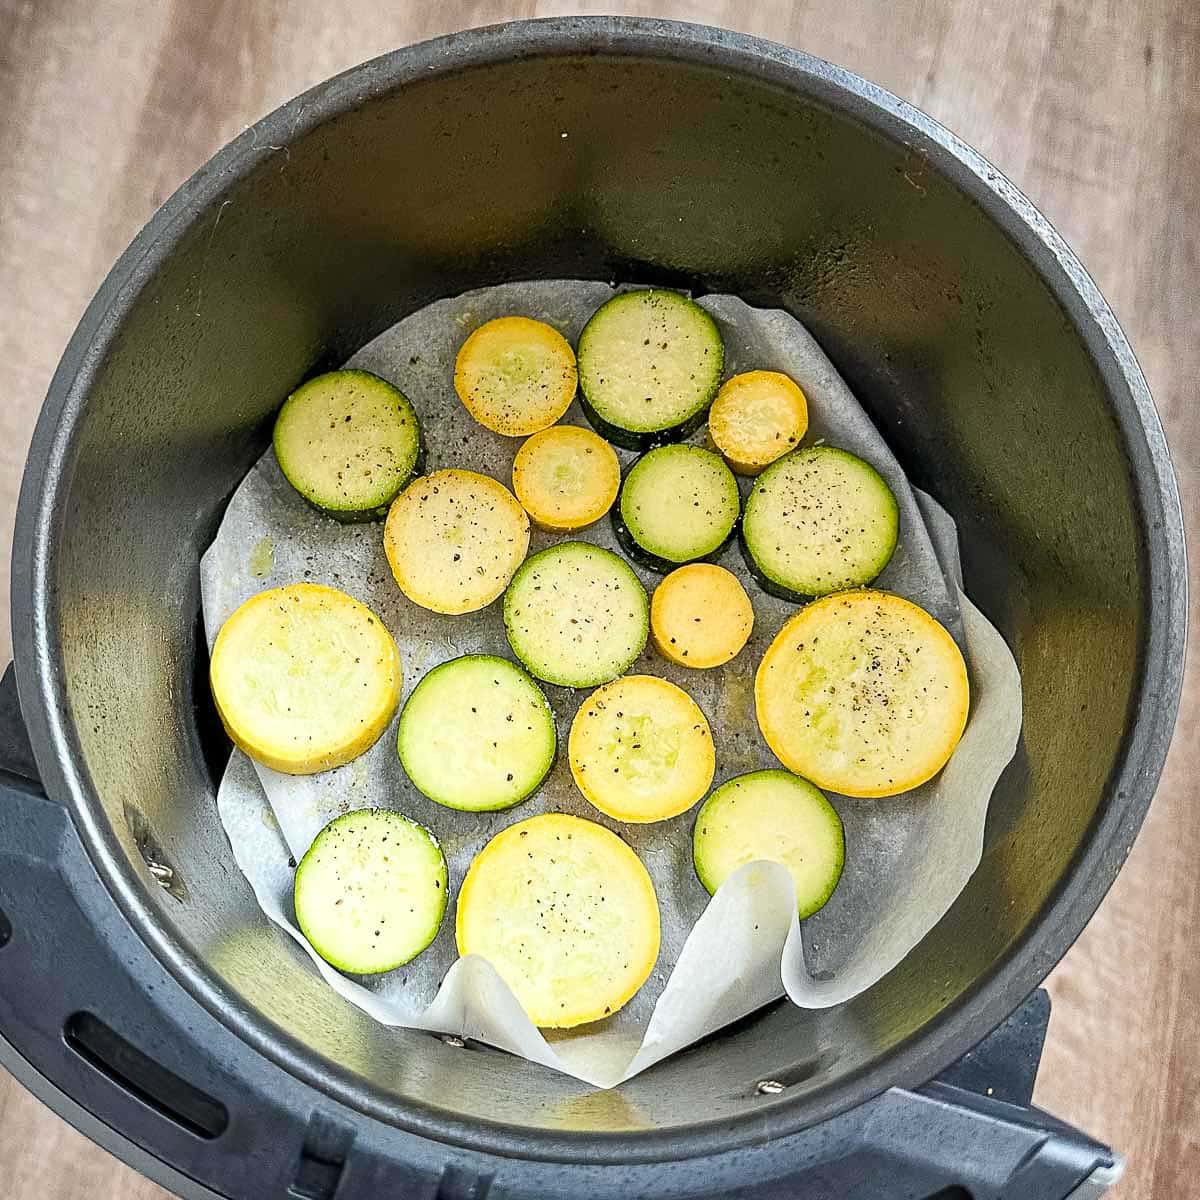 Zucchini and squash coated in olive oil, salt, and pepper in the air fryer basket.